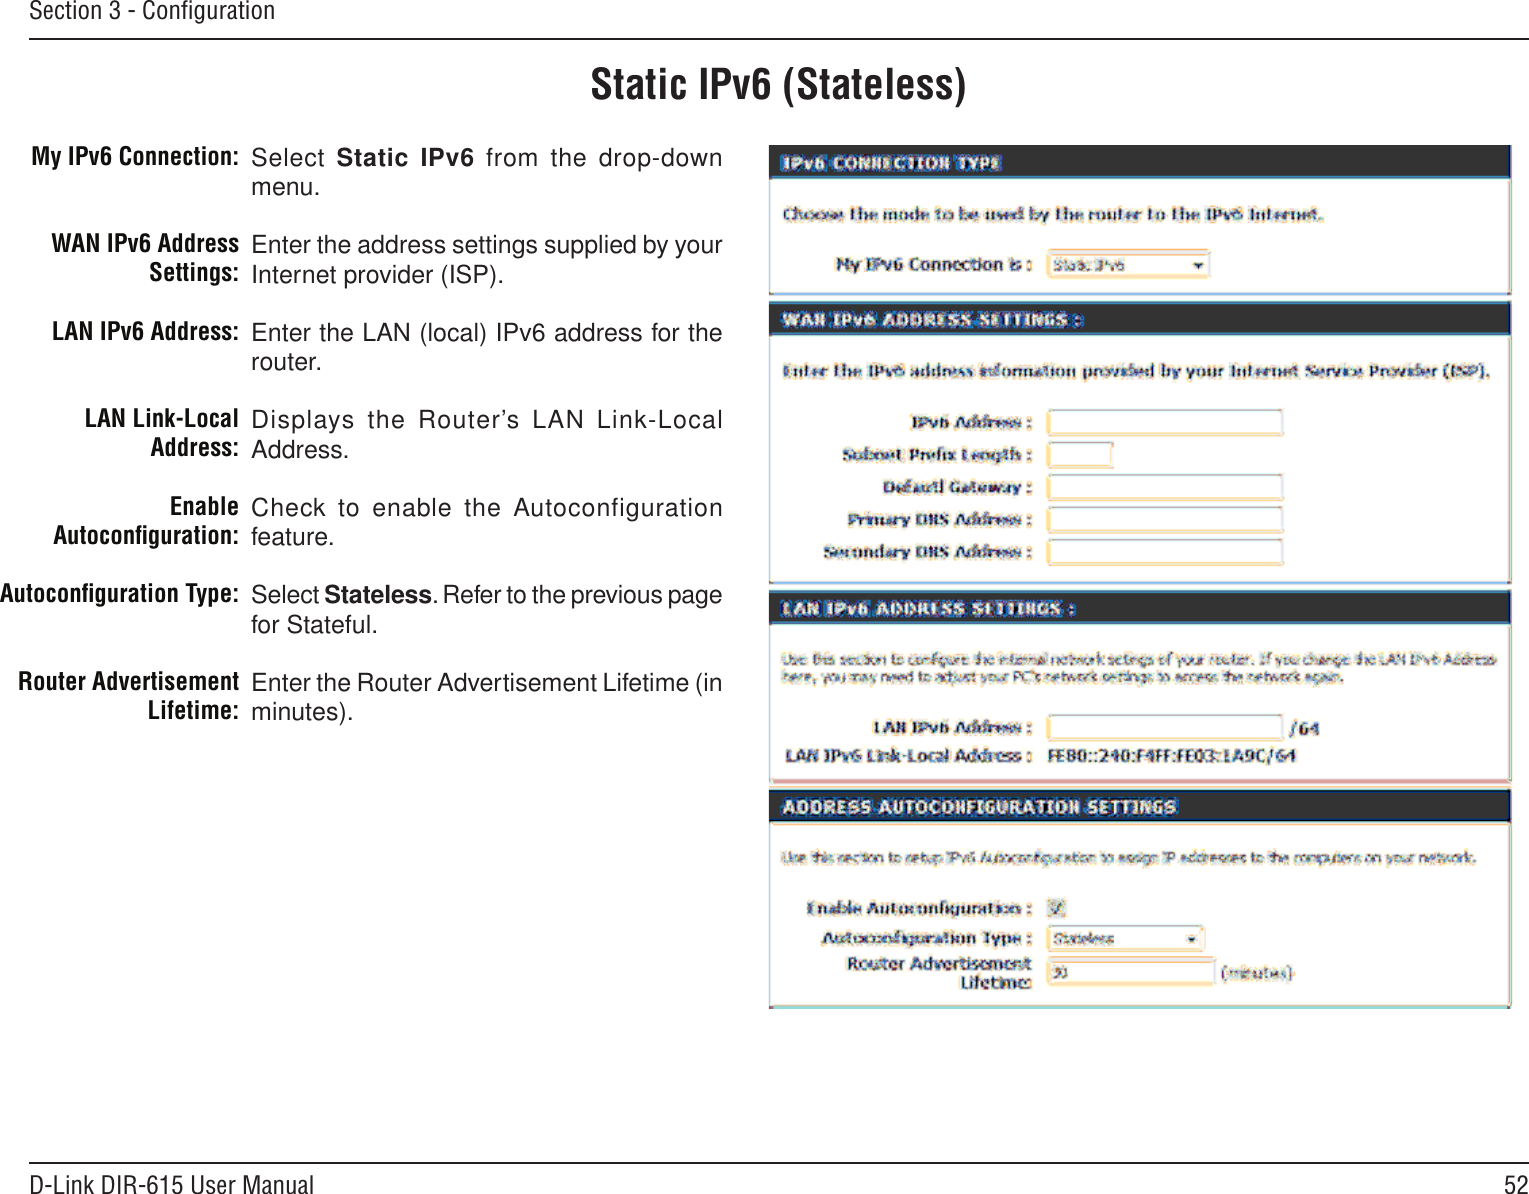 52D-Link DIR-615 User ManualSection 3 - ConﬁgurationStatic IPv6 (Stateless)Select Static IPv6 from the drop-down menu.Enter the address settings supplied by your Internet provider (ISP). Enter the LAN (local) IPv6 address for the router. Displays the Router’s LAN Link-Local Address.Check to enable the Autoconfiguration feature.Select Stateless. Refer to the previous page for Stateful.Enter the Router Advertisement Lifetime (in minutes).My IPv6 Connection:WAN IPv6 Address Settings:LAN IPv6 Address:LAN Link-Local Address:Enable Autoconﬁguration:Autoconﬁguration Type:Router Advertisement  Lifetime: